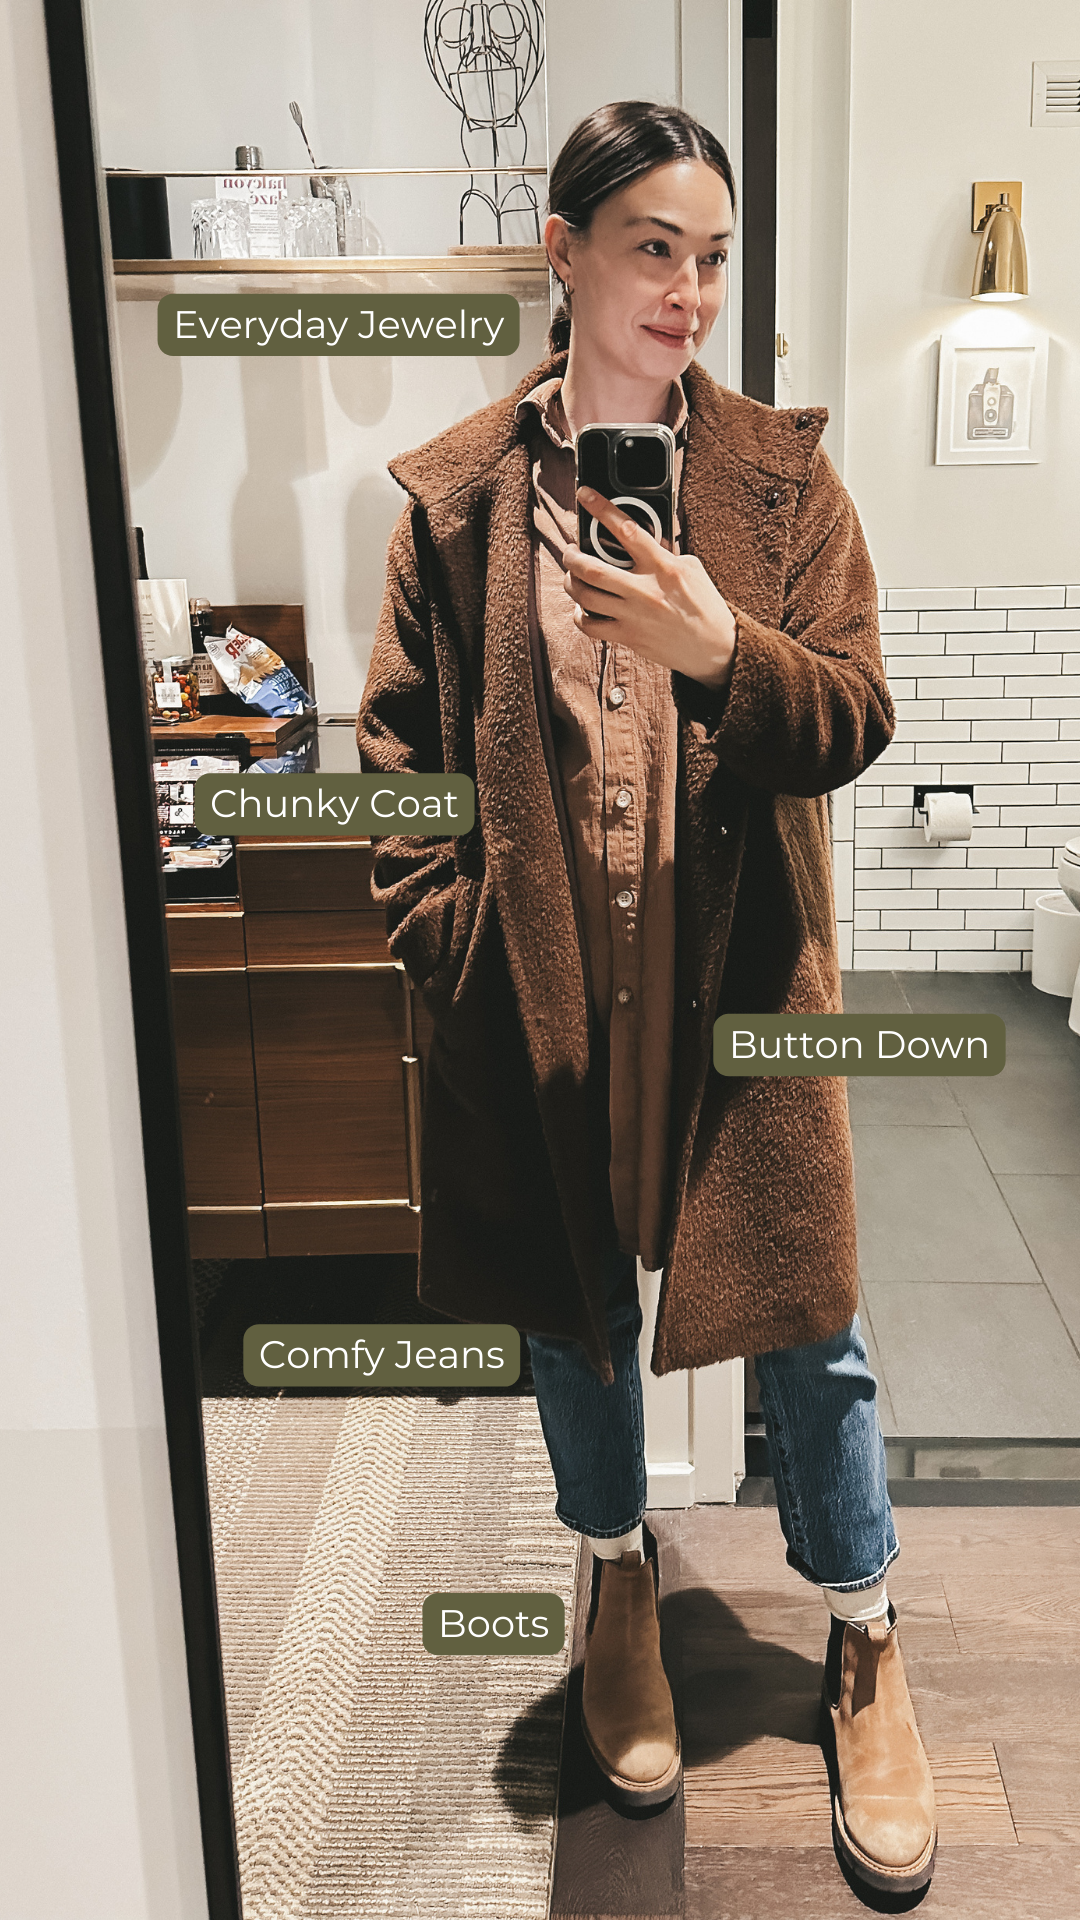 out fit idea with chunky coat, boots, button down, and everyday jewelry